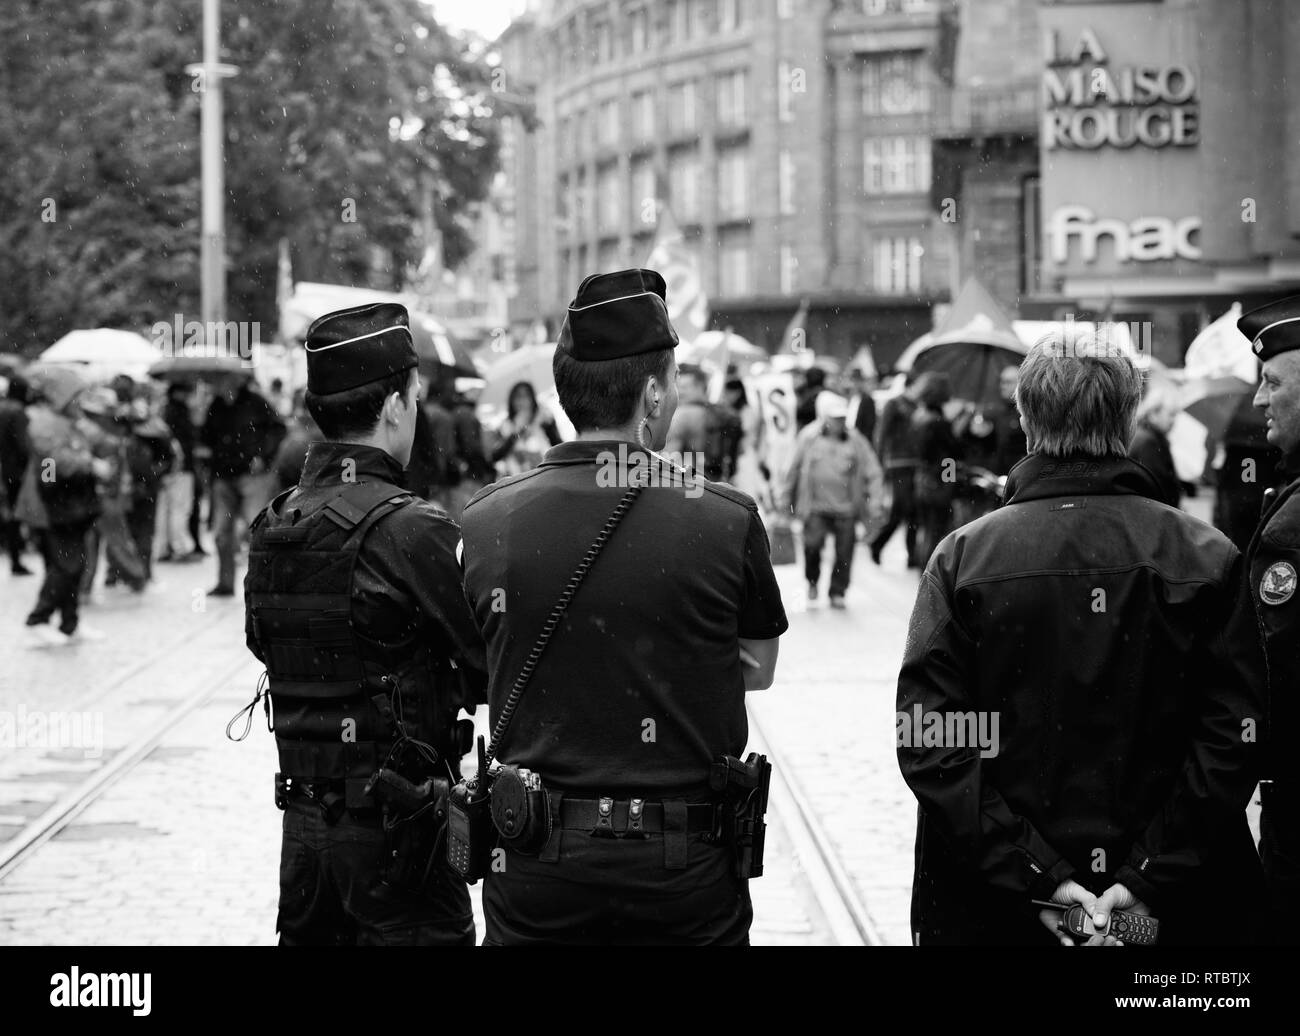 STRASBOURG, FRANCE - SEPT 12, 2017: Police under rain surveillance of people at political march during a French Nationwide day of protest against the labor reform proposed by Emmanuel Macron Government Stock Photo